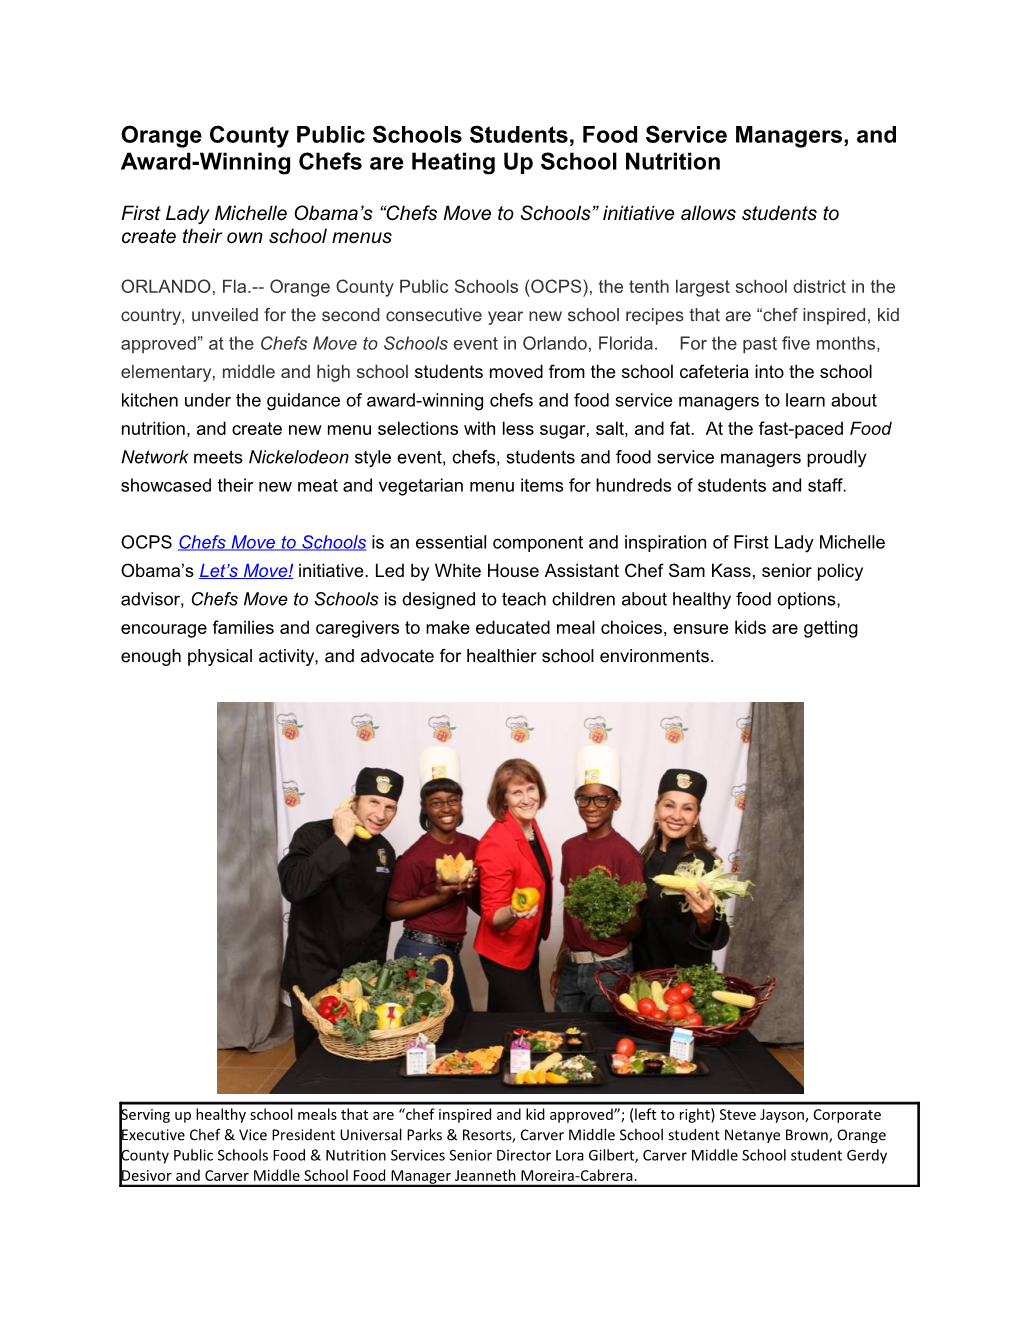 Orange County Public Schools Students, Food Service Managers, and Award-Winning Chefs